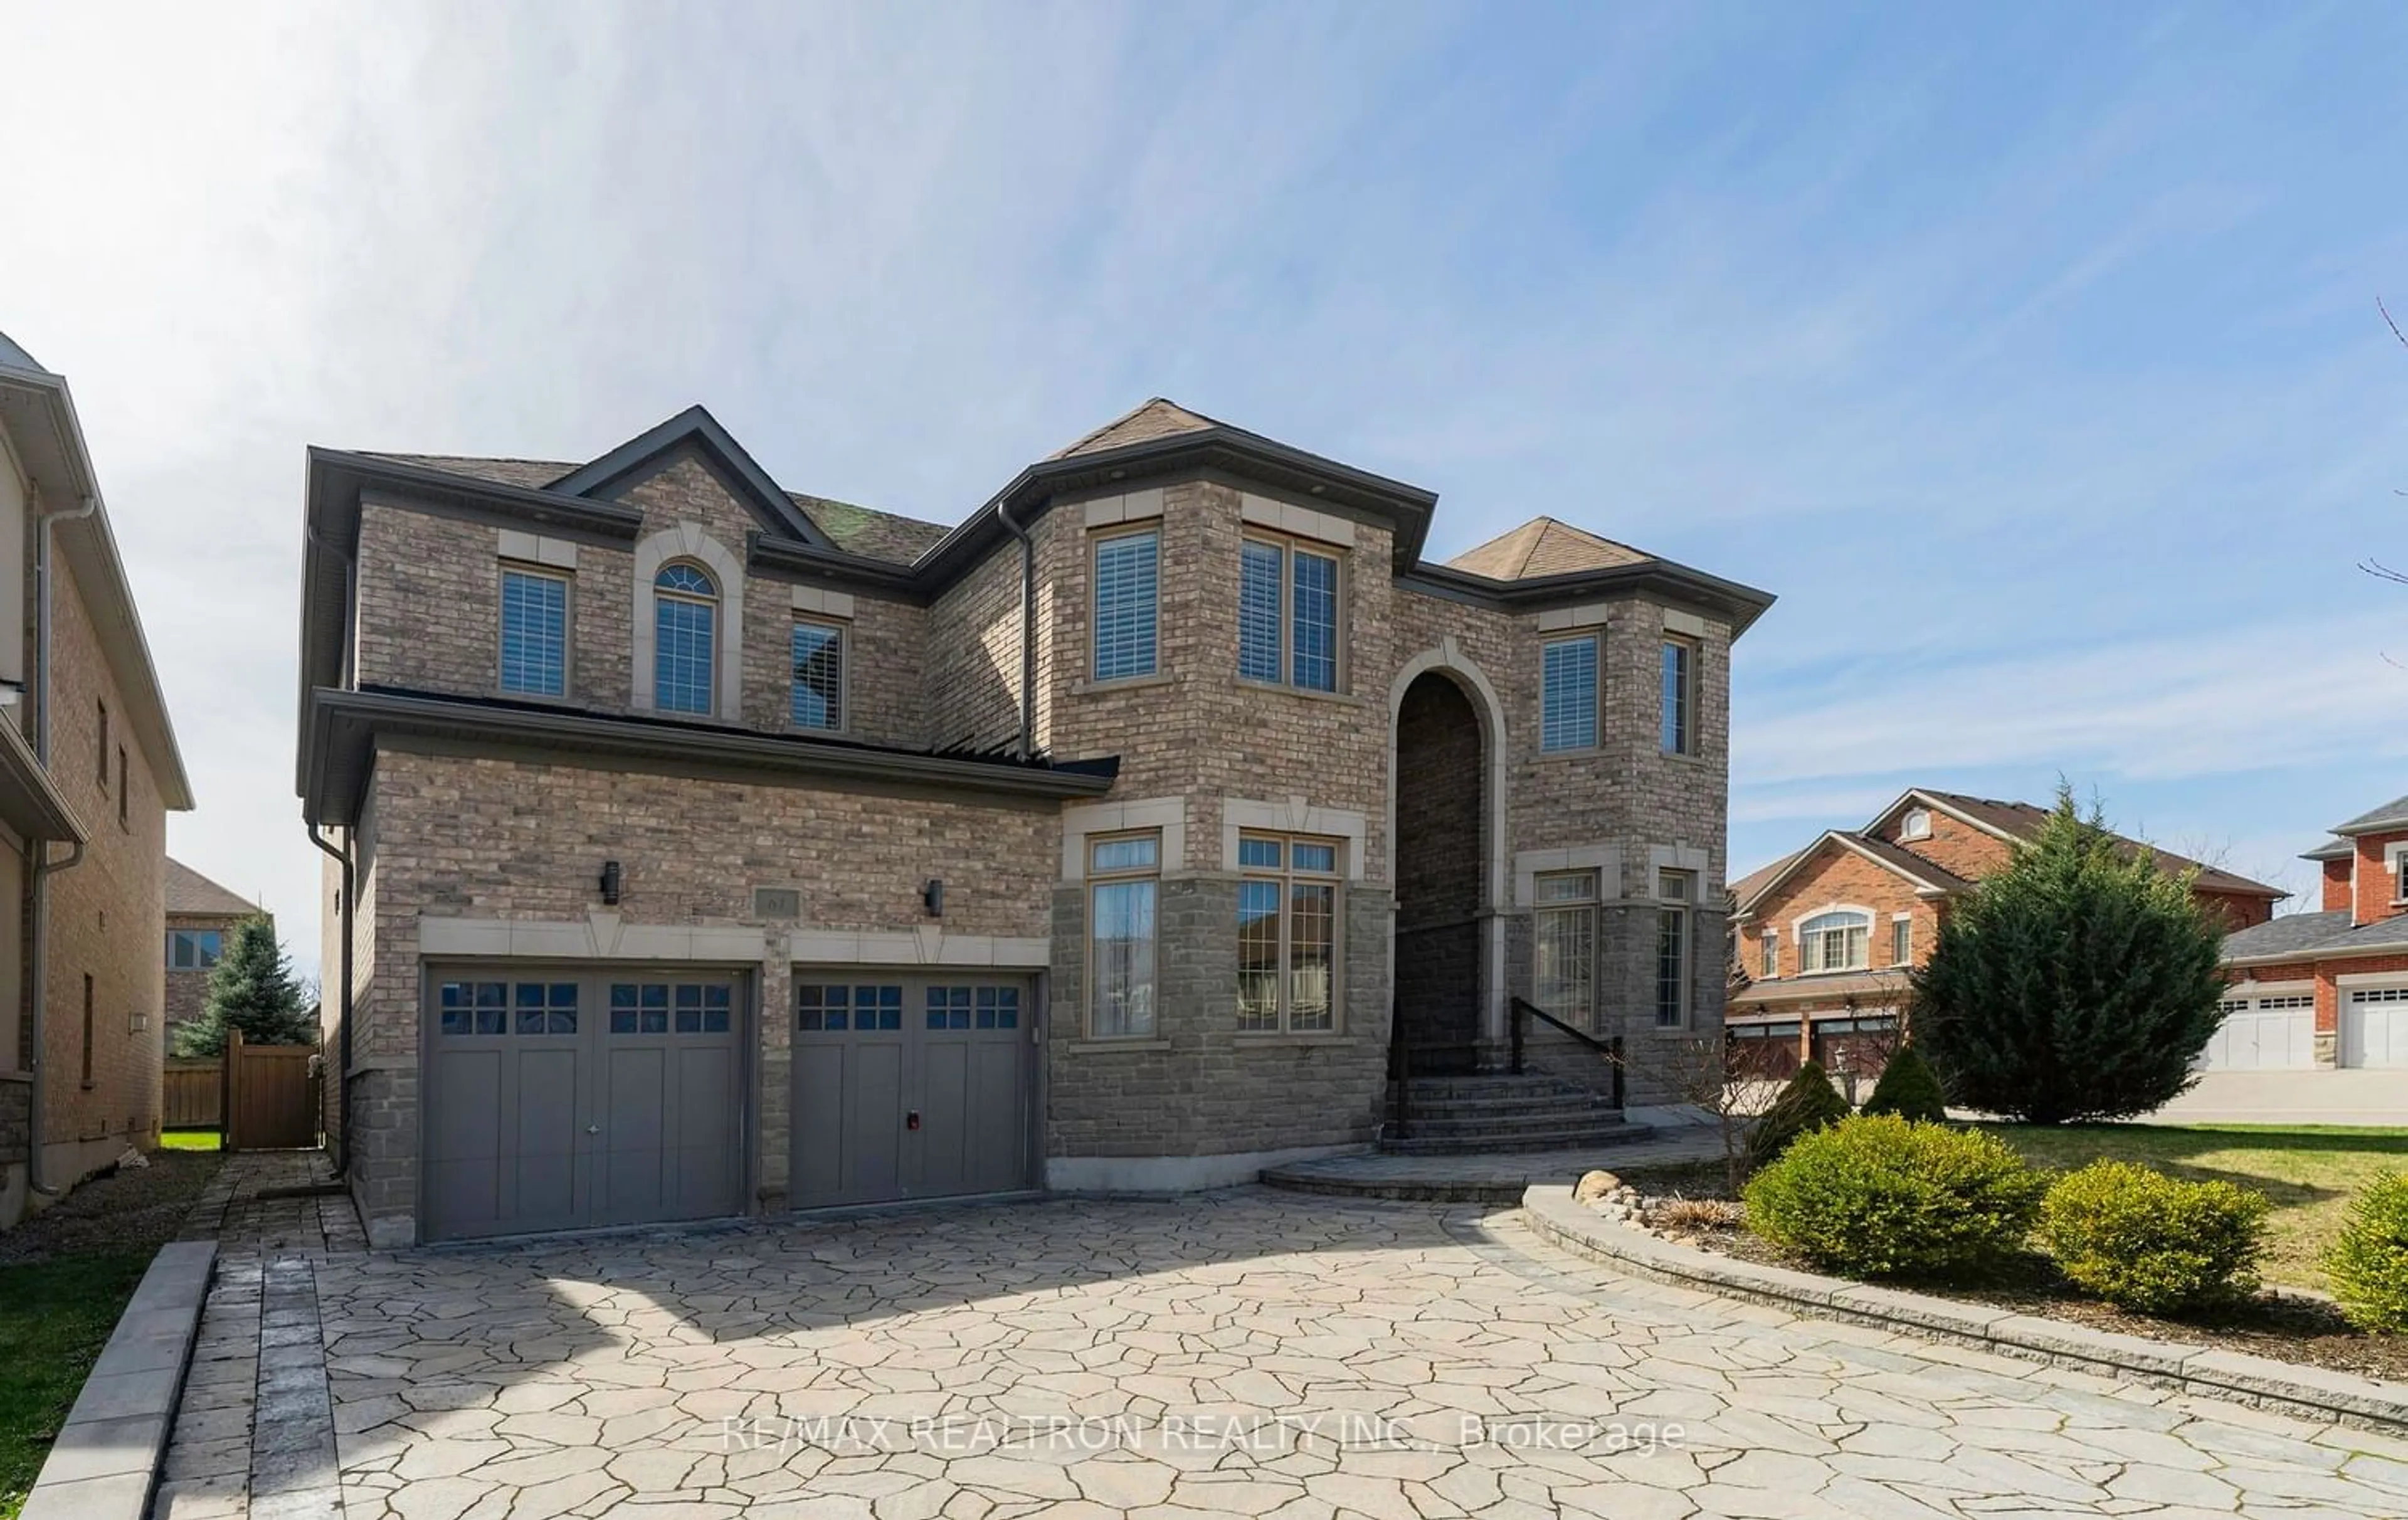 Home with brick exterior material for 61 Stratheden Lane, Vaughan Ontario L6A 4J9